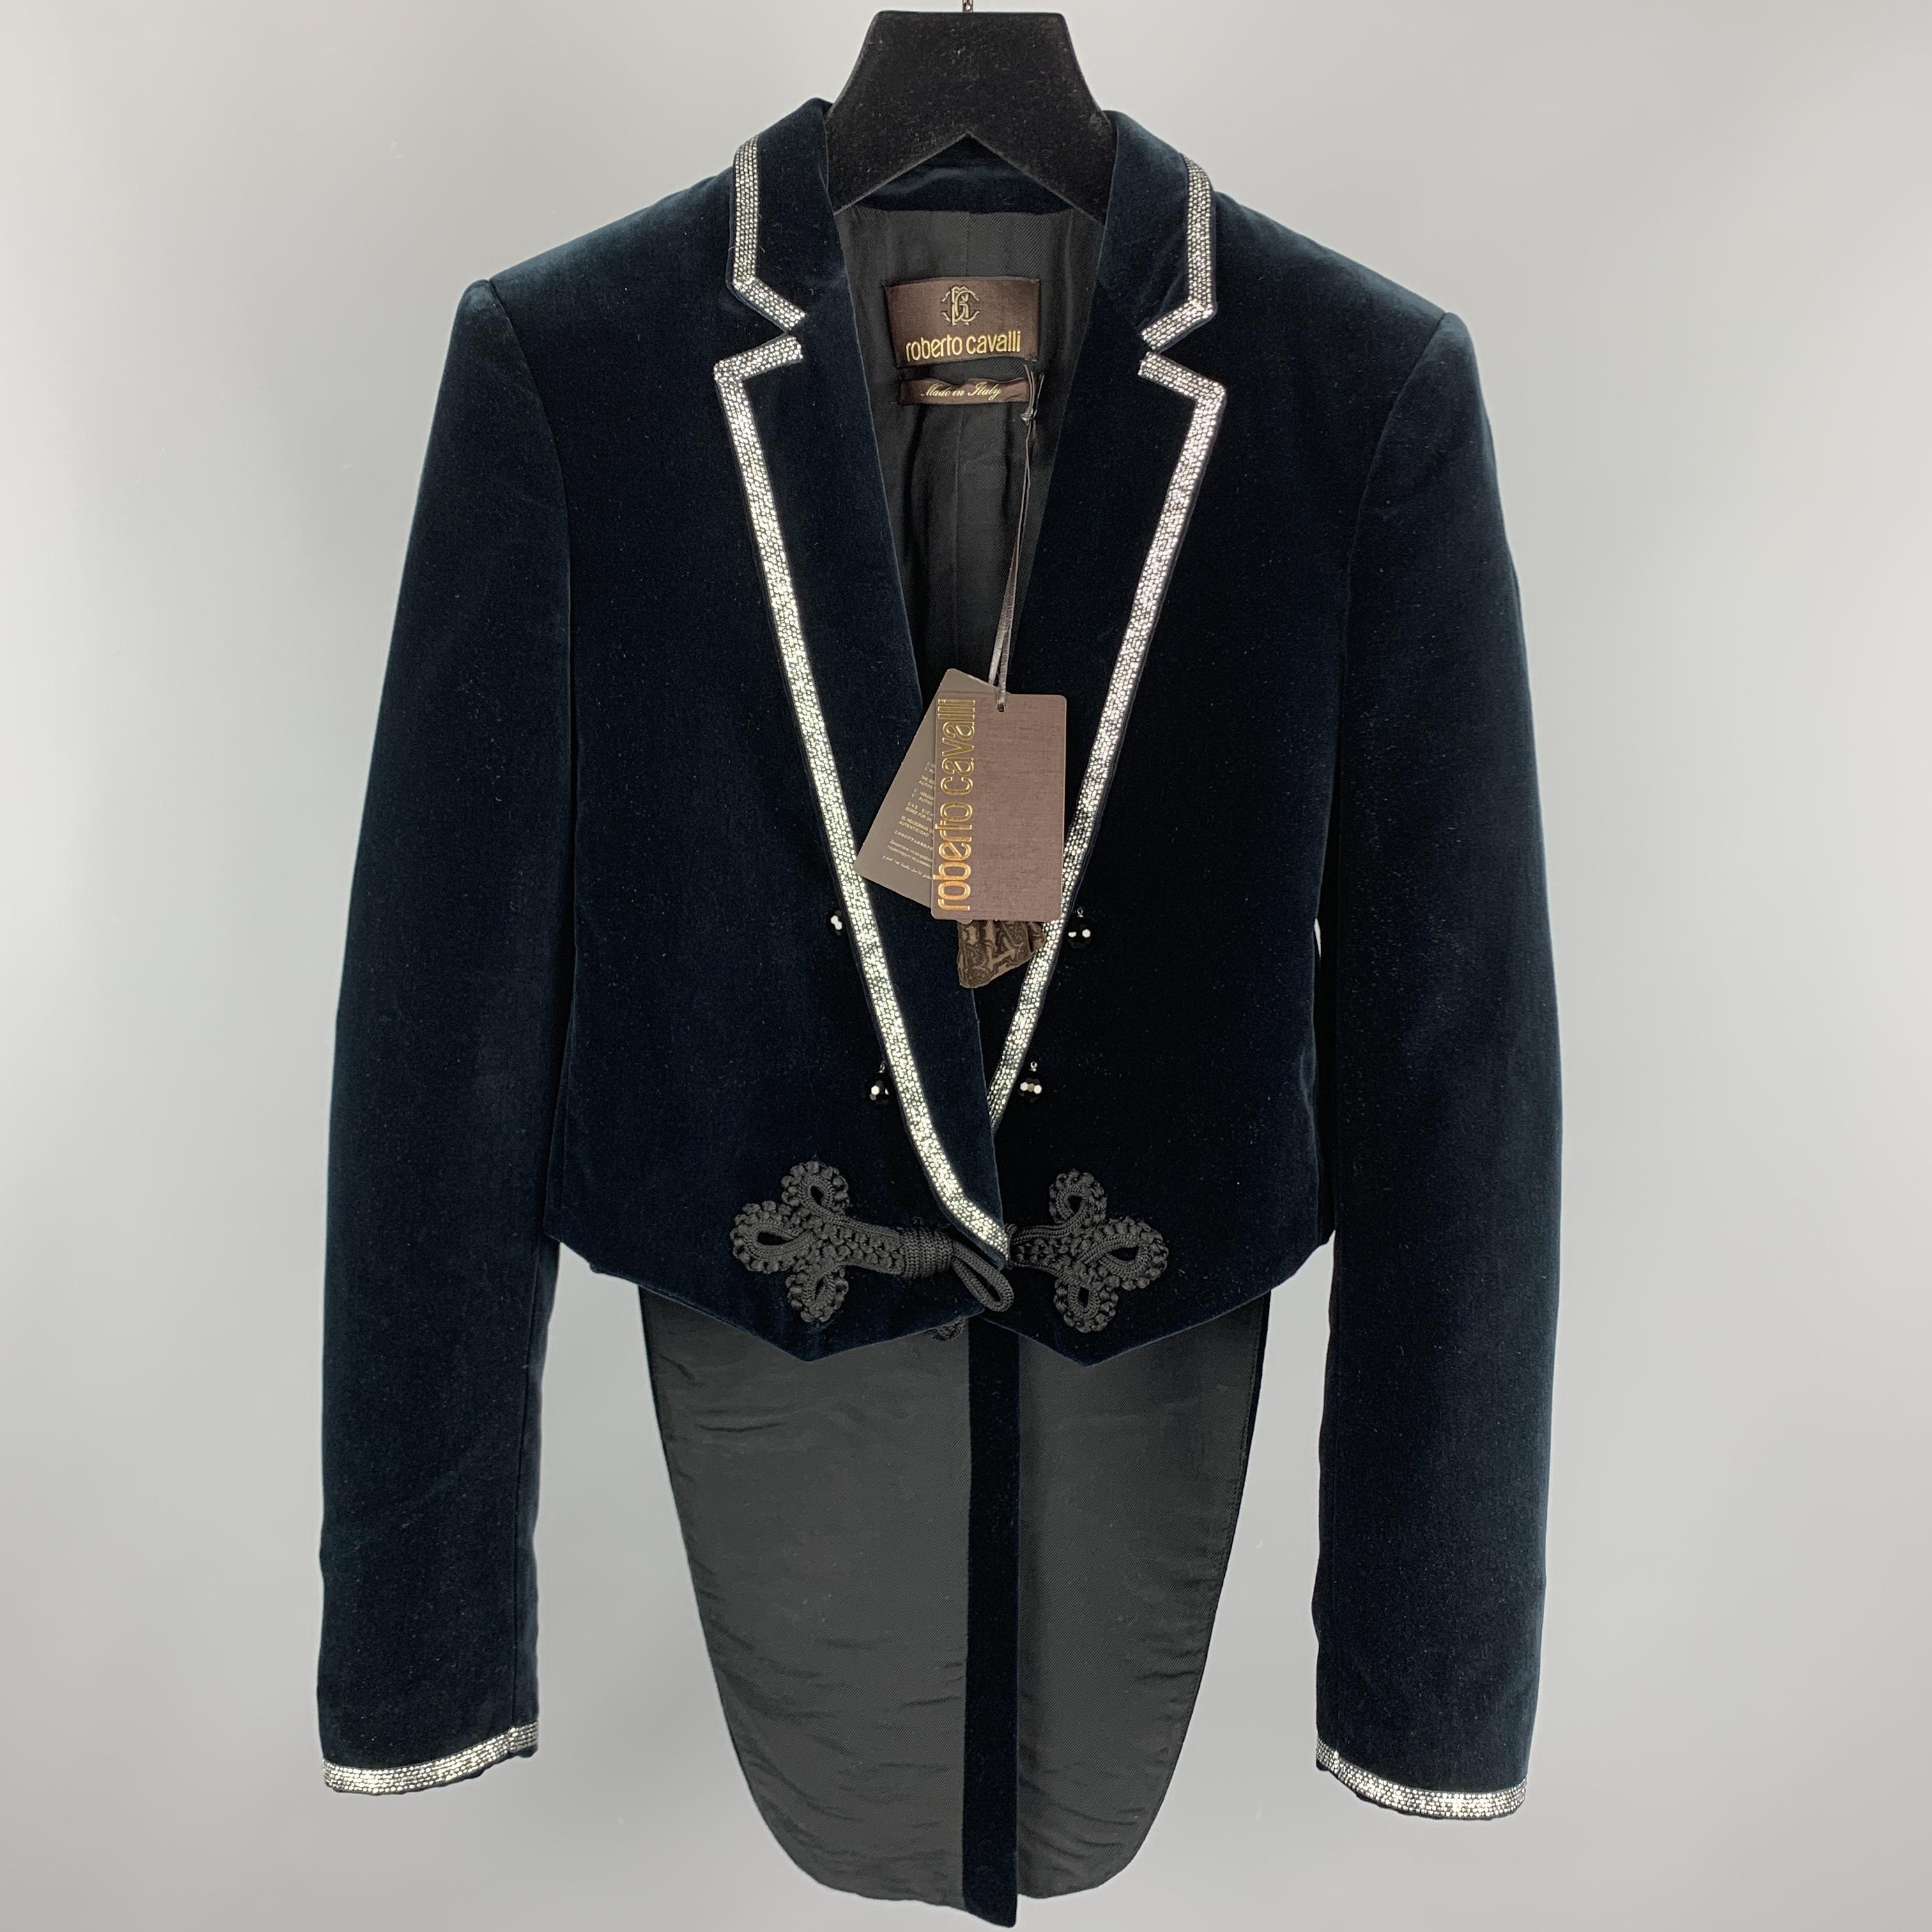 ROBERTO CAVALLI Jacket comes in a navy solid velvet material, with a beaded lapel, embellishments at front, tails, and embellished closure at cuffs. Marks at back. Made in Italy.

New With Tags.
Marked: IT 42

Measurements:

Shoulder: 15 in. 
Chest: